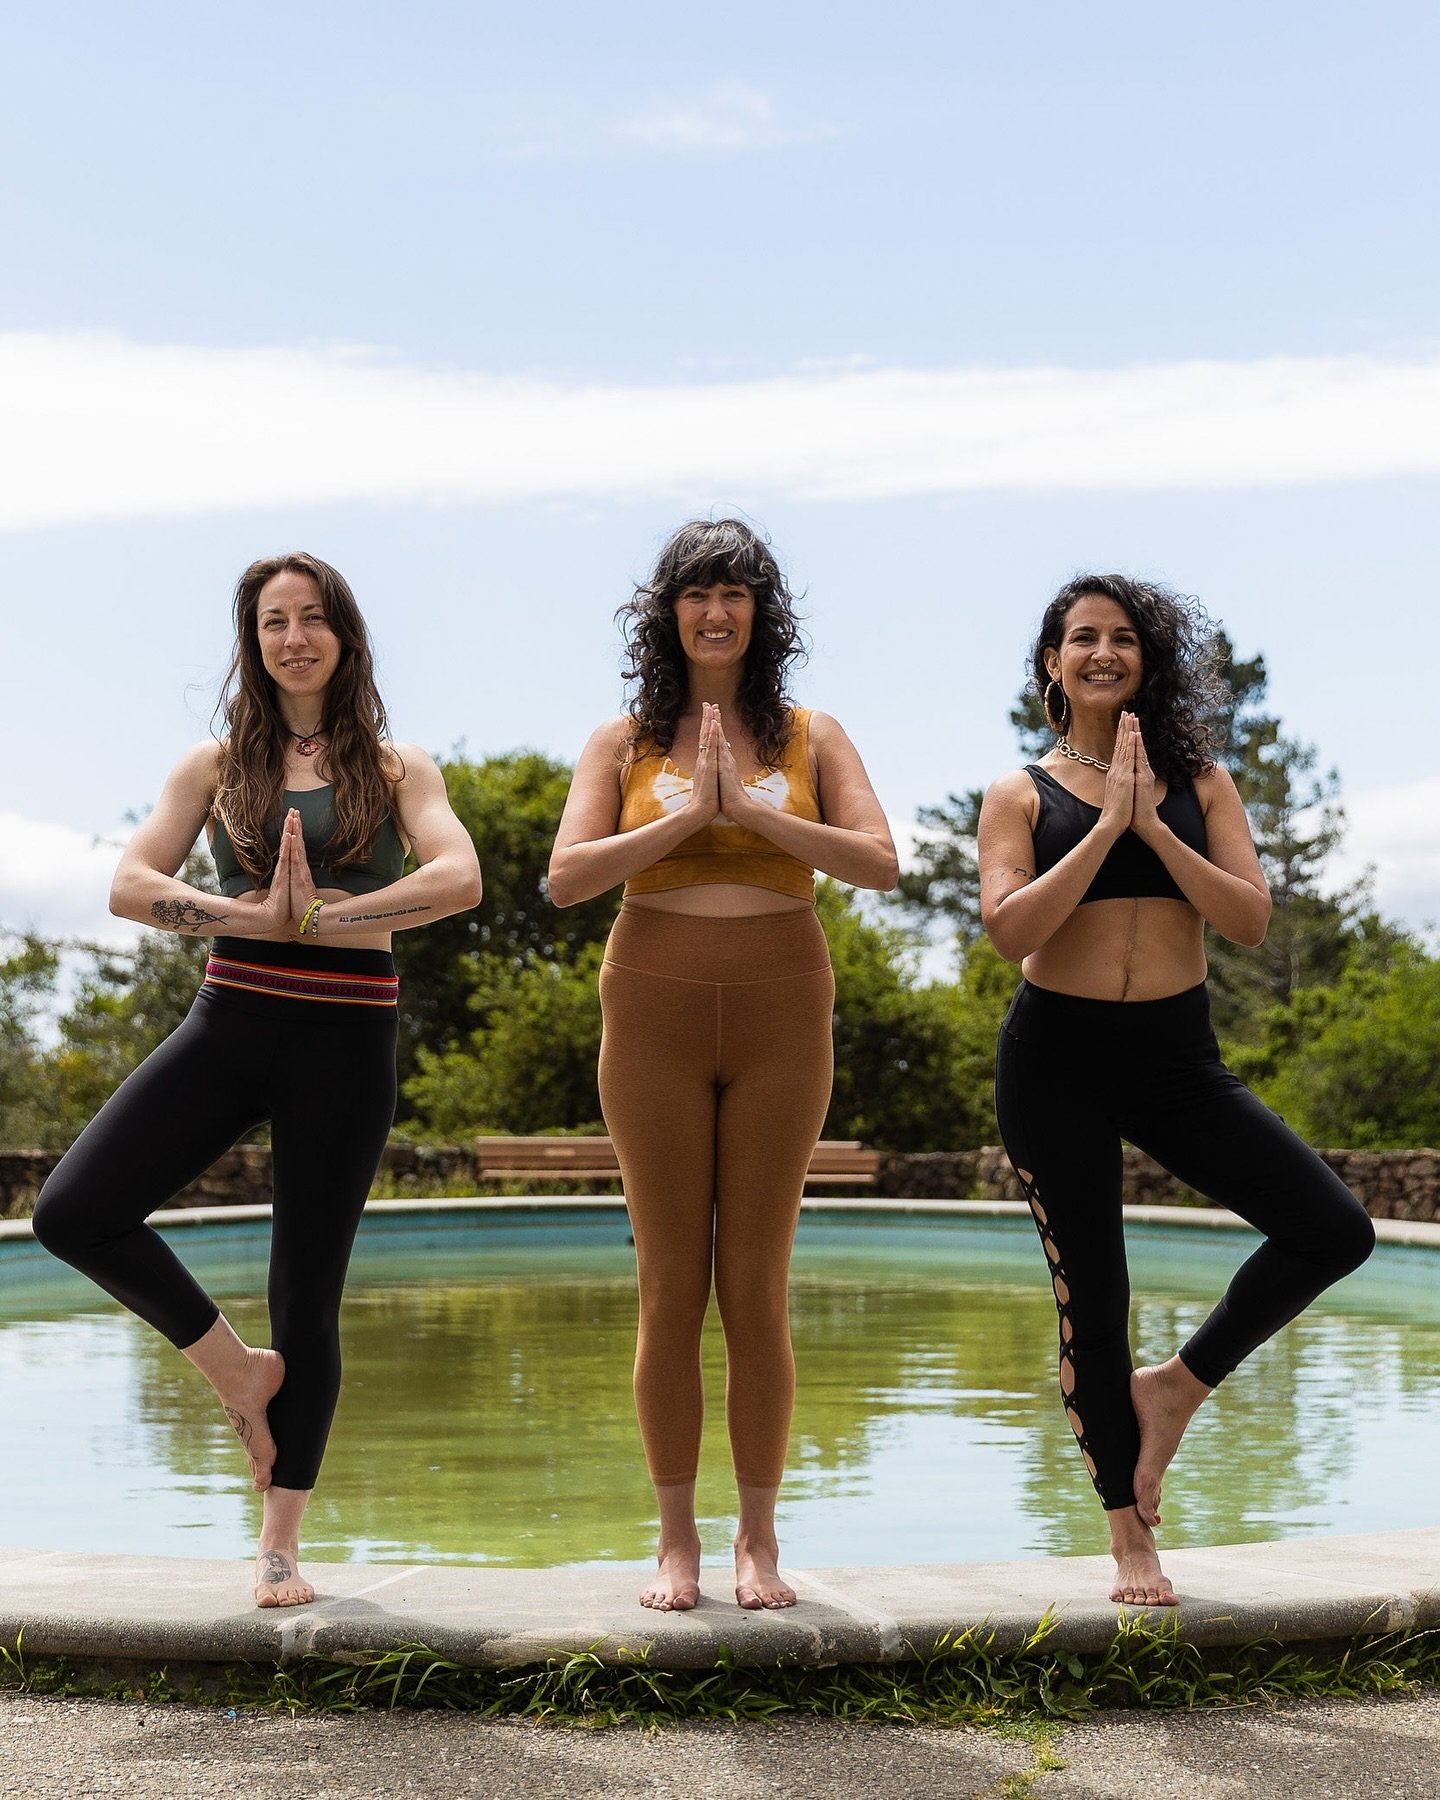 Left Coast Power Yoga is a supportive community of yogis. We help stressed-out overachievers find strength and balance, feel good in their bodies, and use their yoga practice to handle whatever life throws at them.

Thinking about giving us a try? He